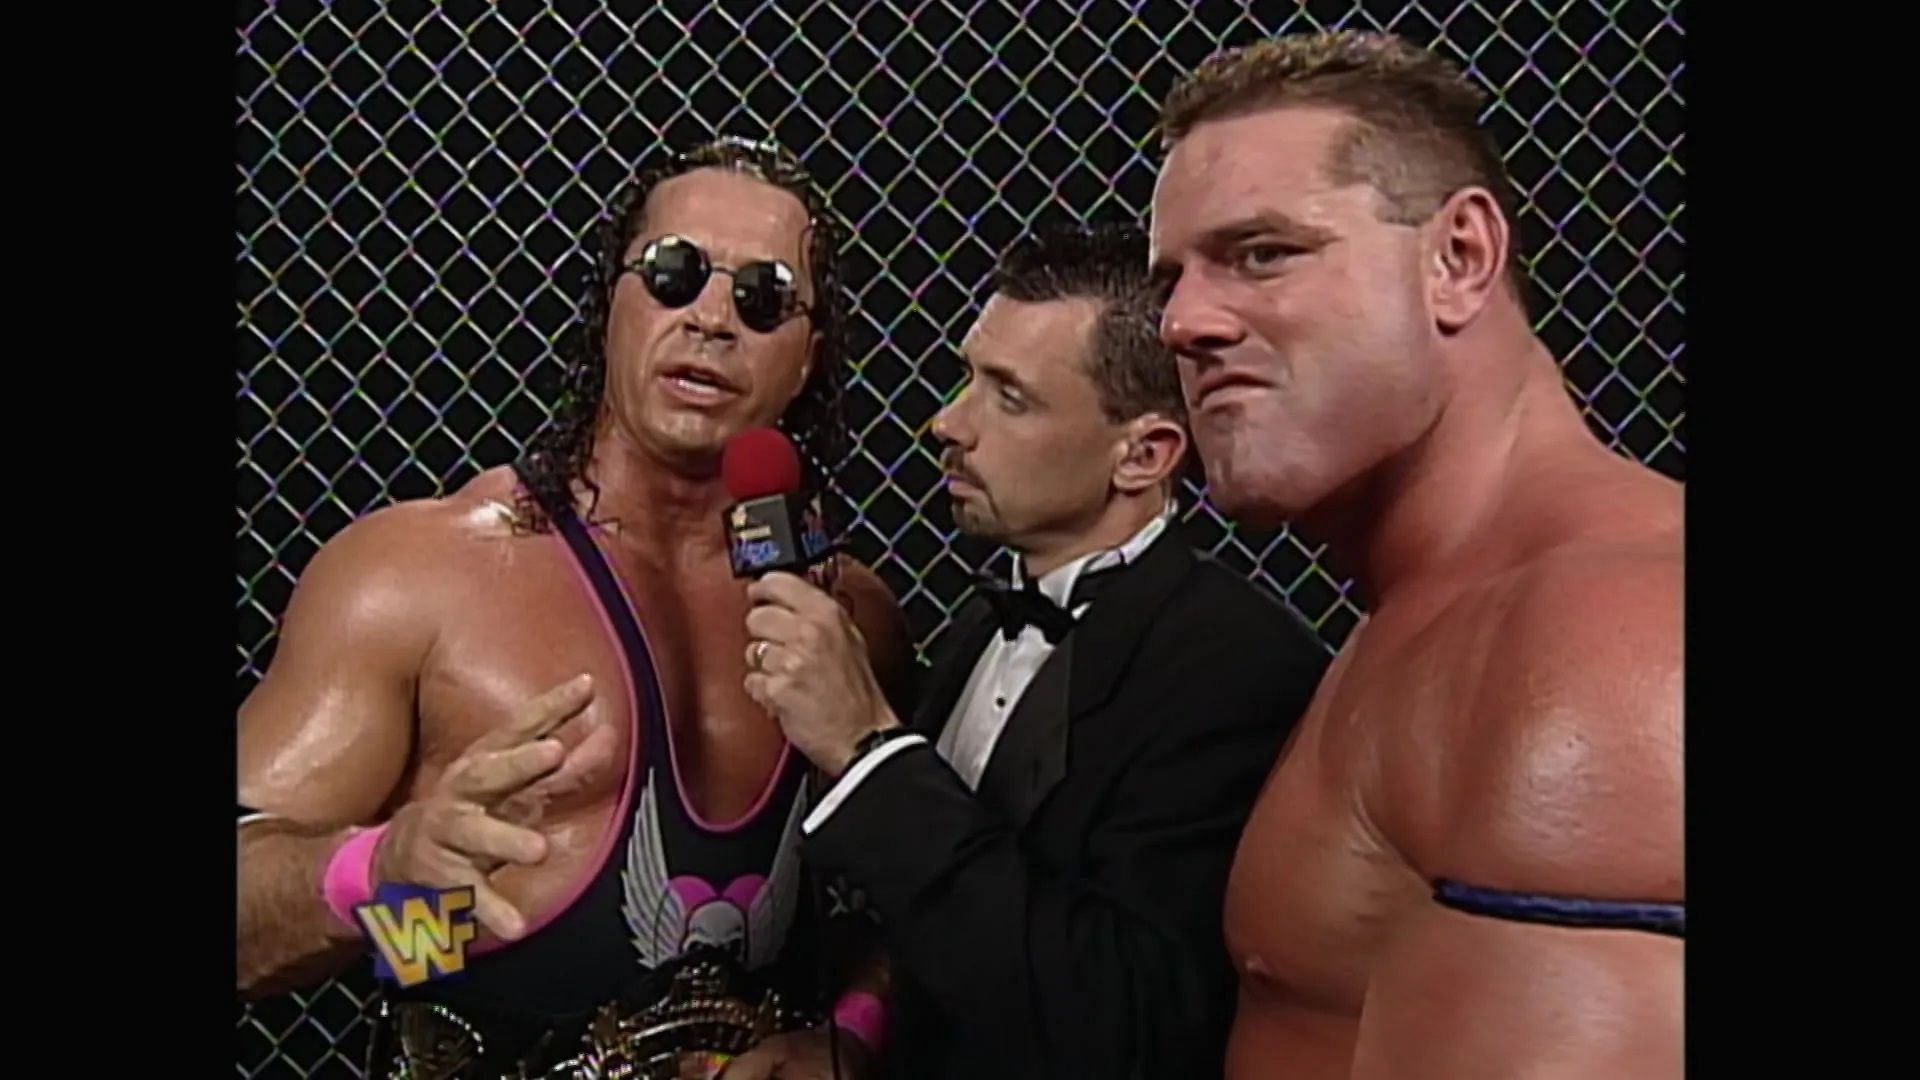 Bret Hart with Michael Cole and The British Bulldog